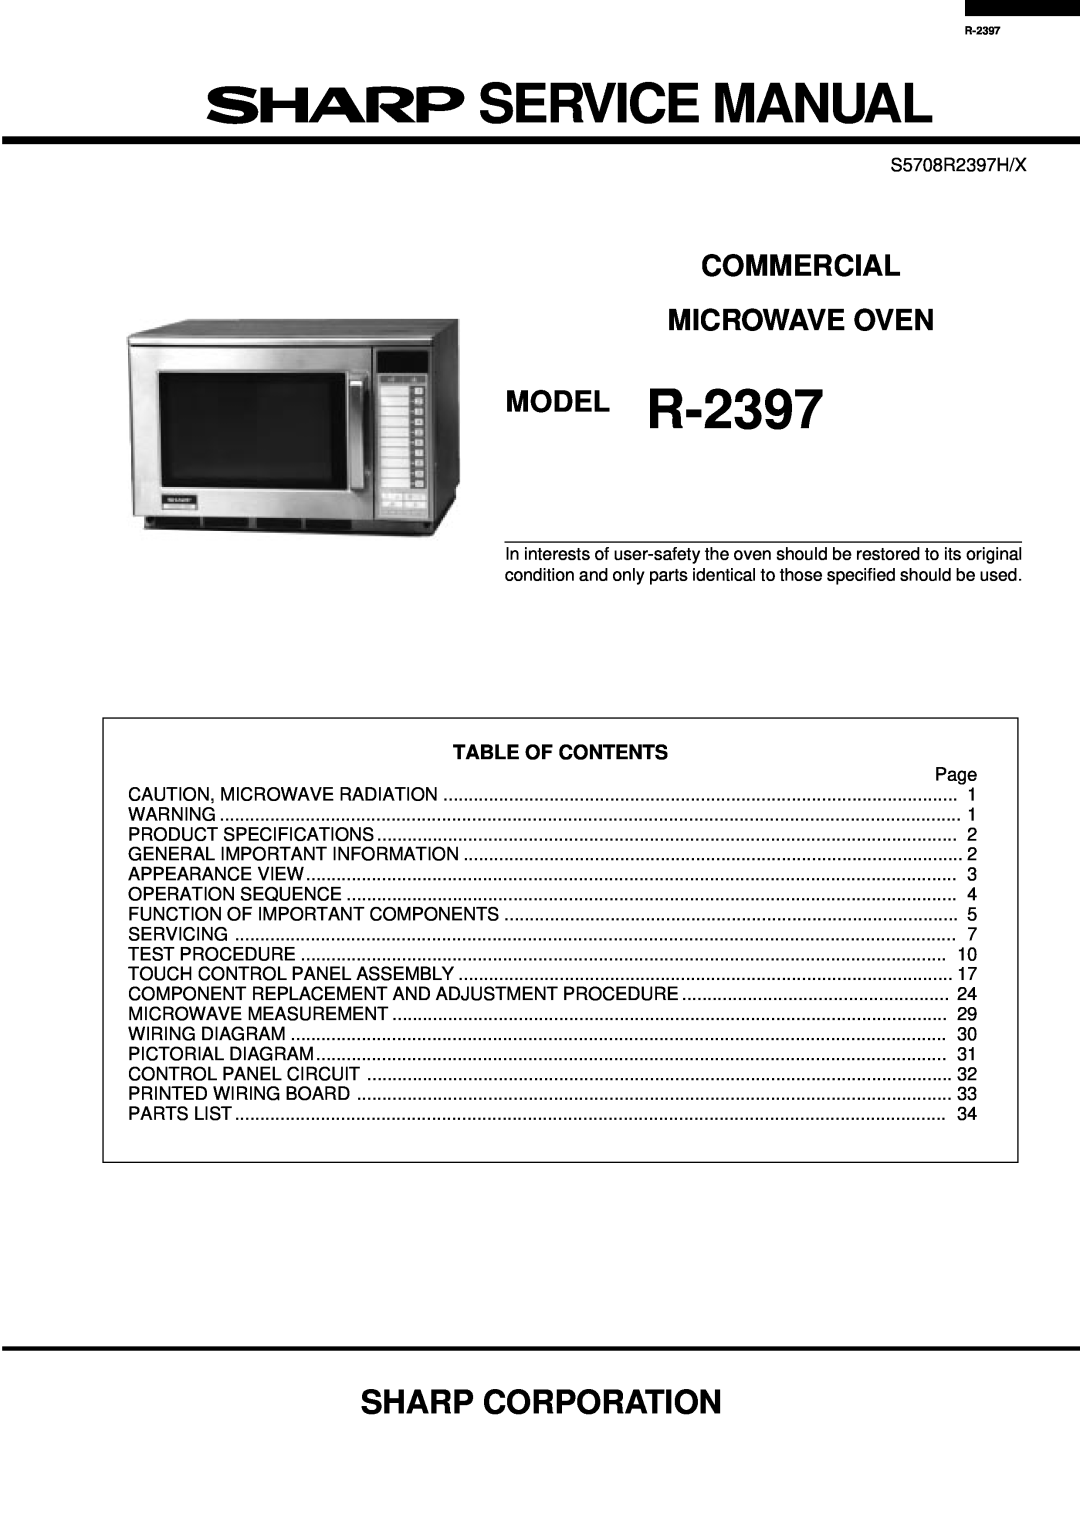 Sharp service manual Sharp Corporation, Table Of Contents, COMMERCIAL MICROWAVE OVEN MODEL R-2397 